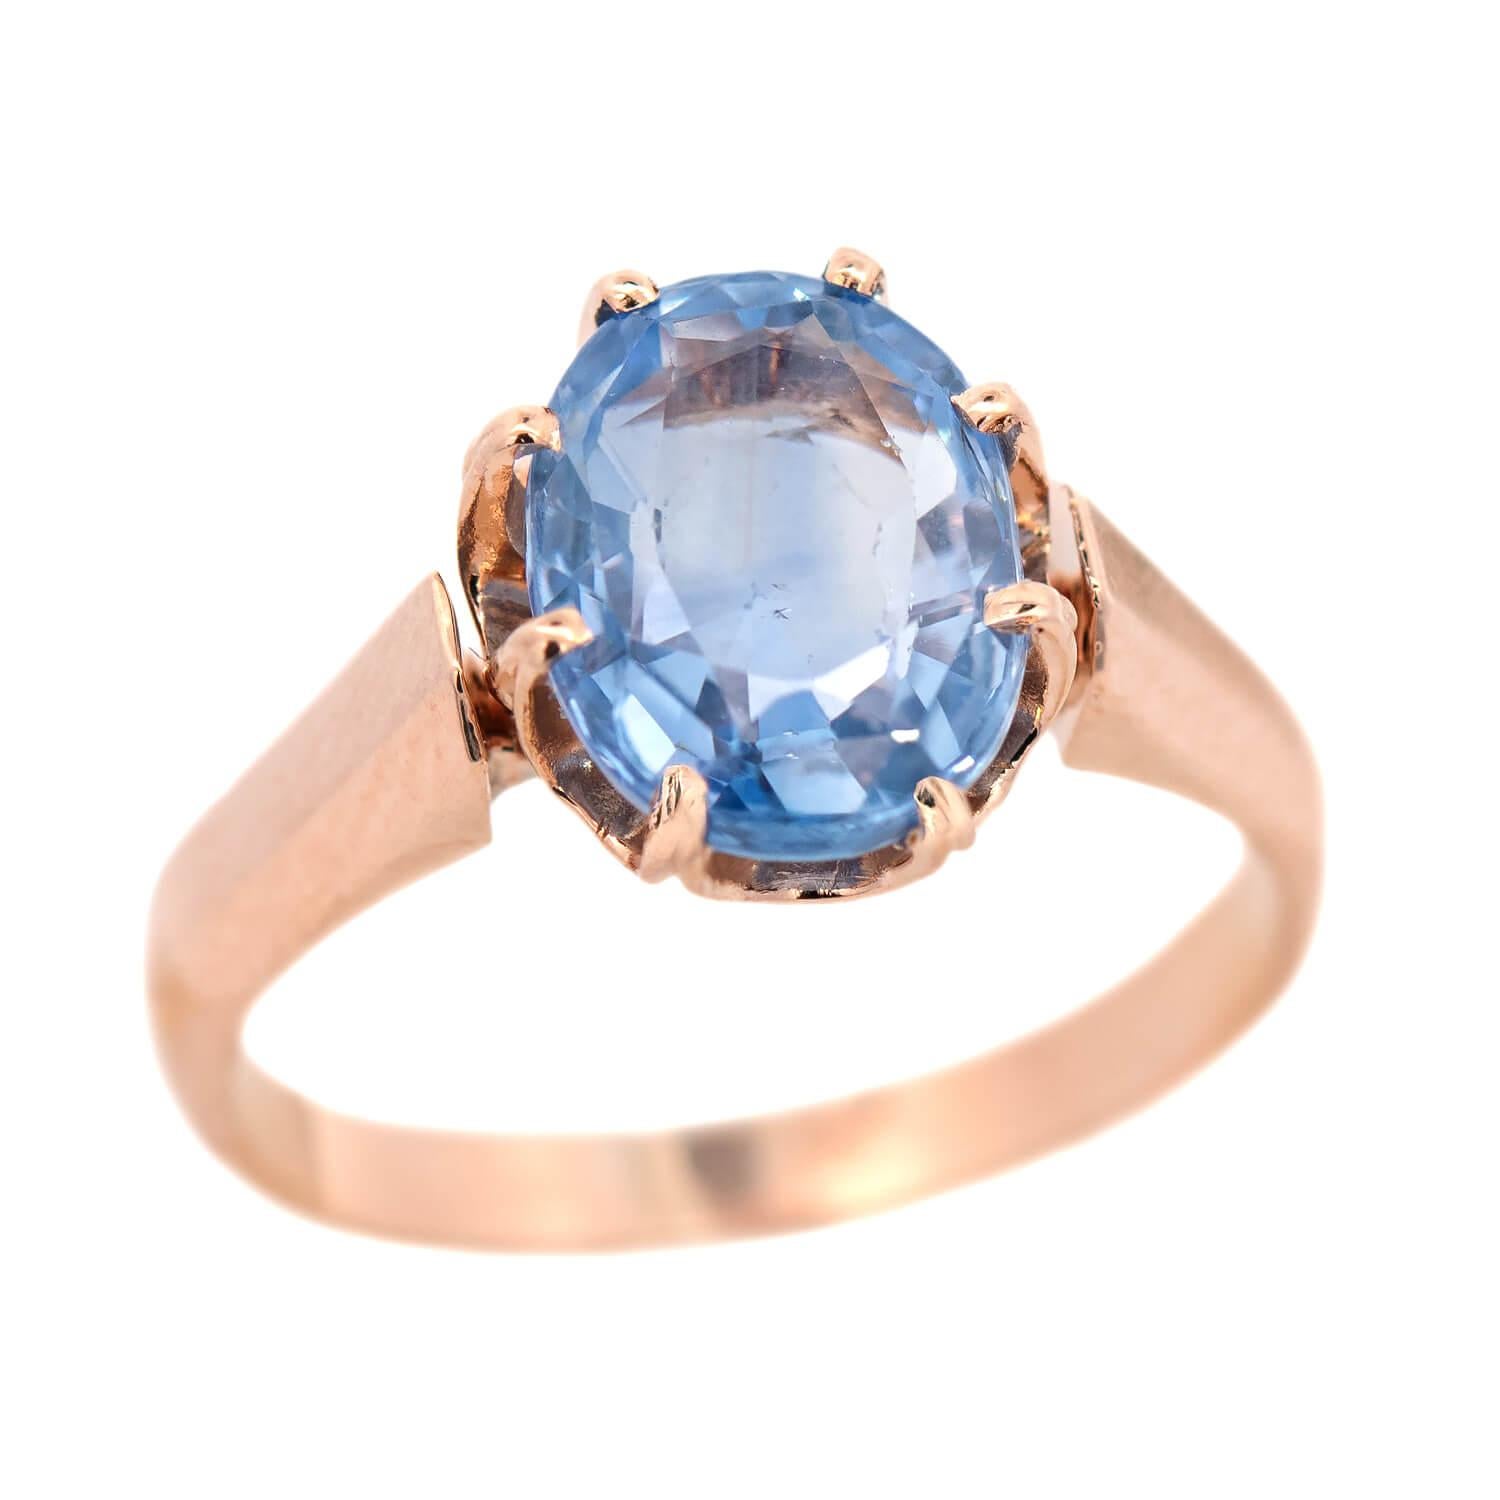 Victorian 14k Oval Sapphire Ring 3.34ct